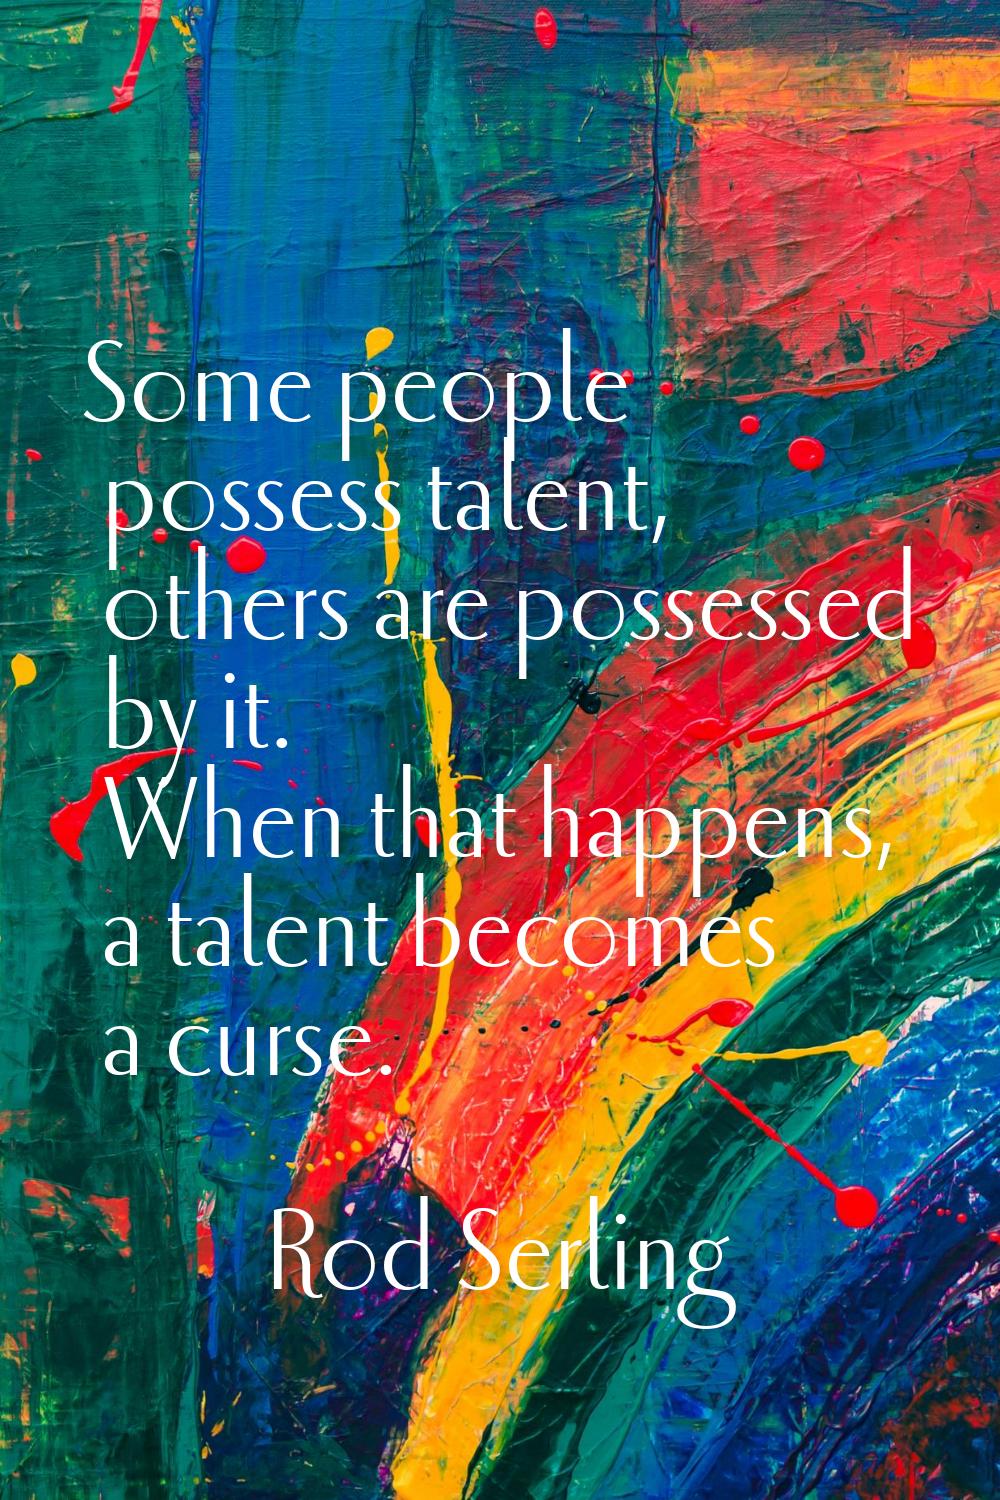 Some people possess talent, others are possessed by it. When that happens, a talent becomes a curse